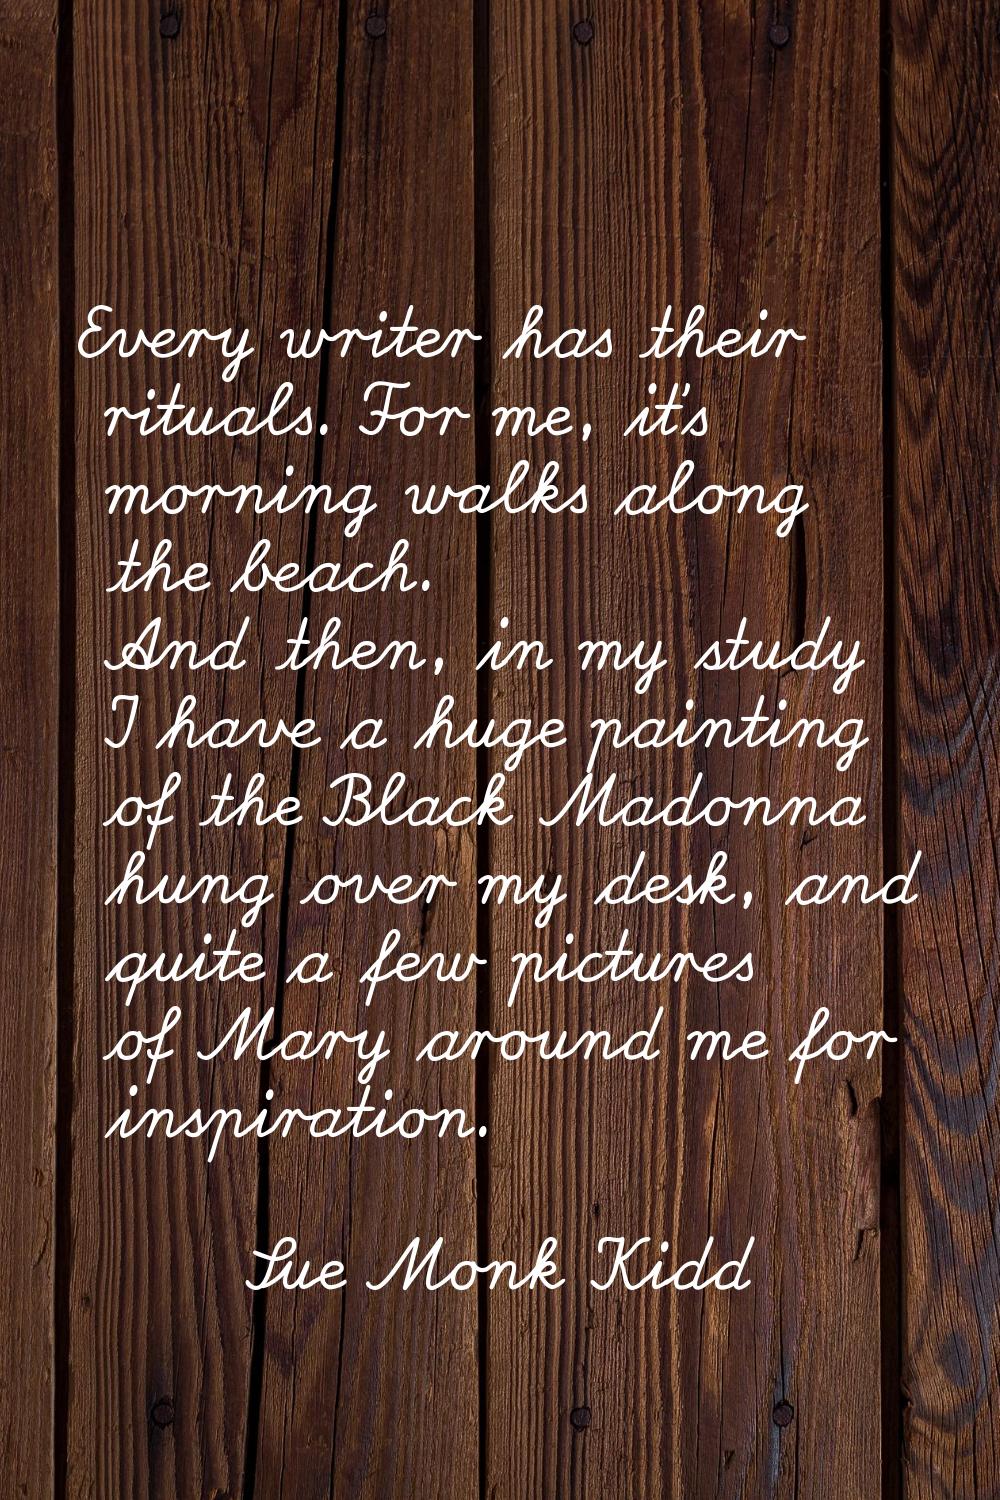 Every writer has their rituals. For me, it's morning walks along the beach. And then, in my study I